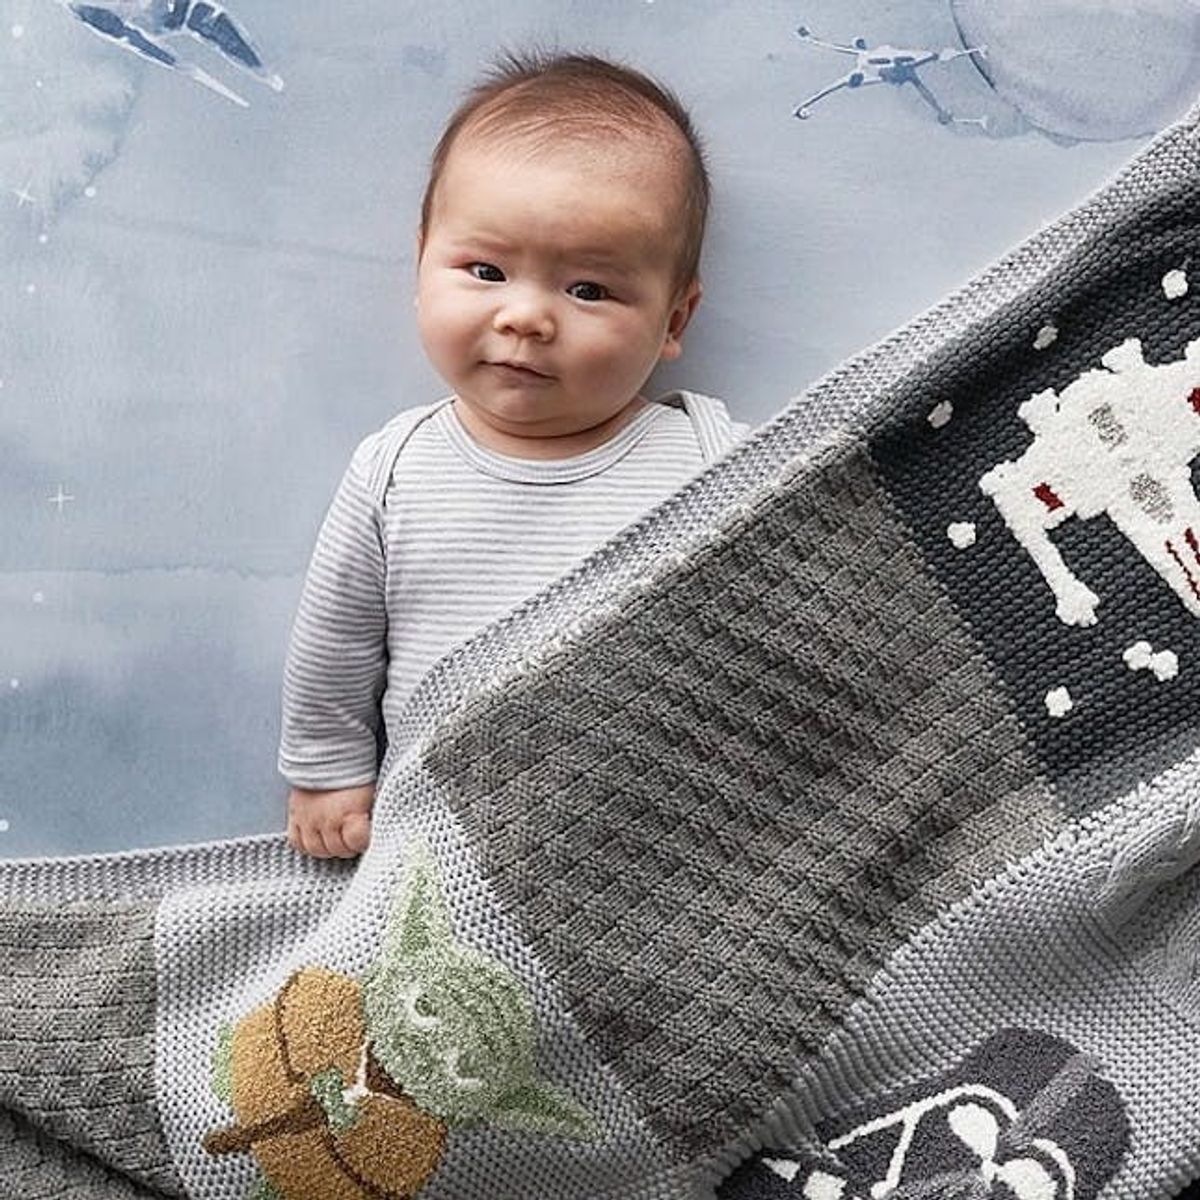 Pottery Barn Kids Synced Up With Star Wars for the Most Precious Nursery Collection